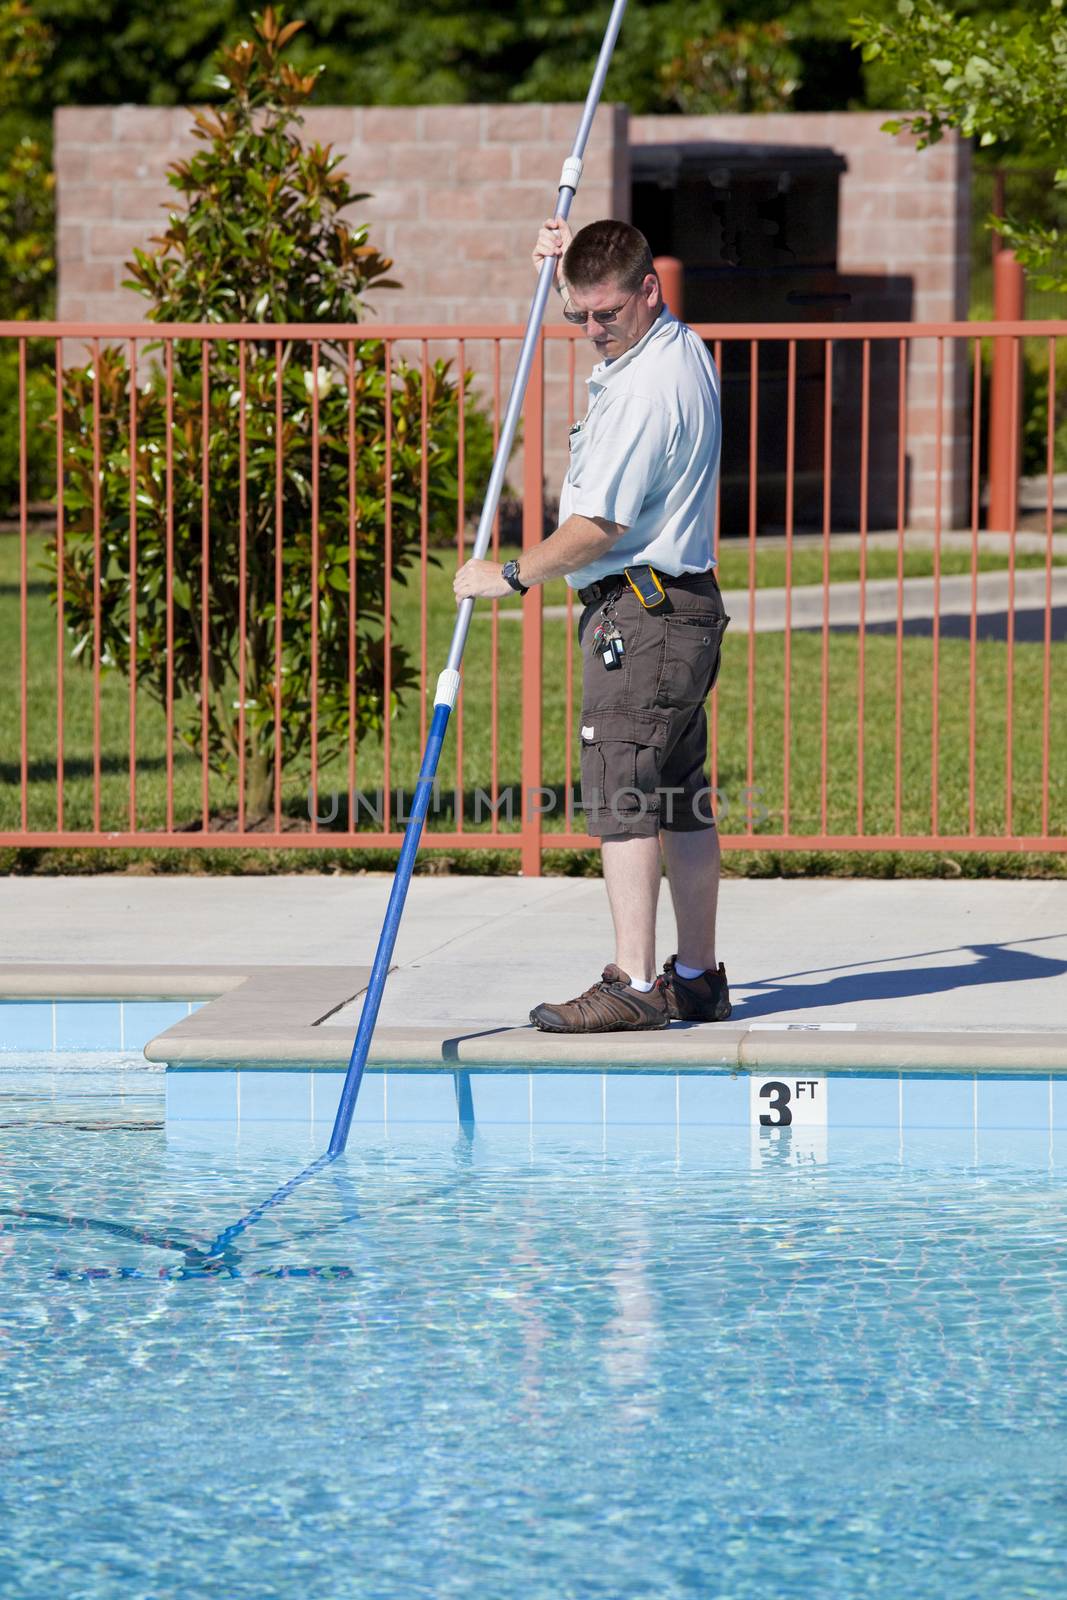 Service man checking chlorine, PH and other chemical levels and cleaning community pool